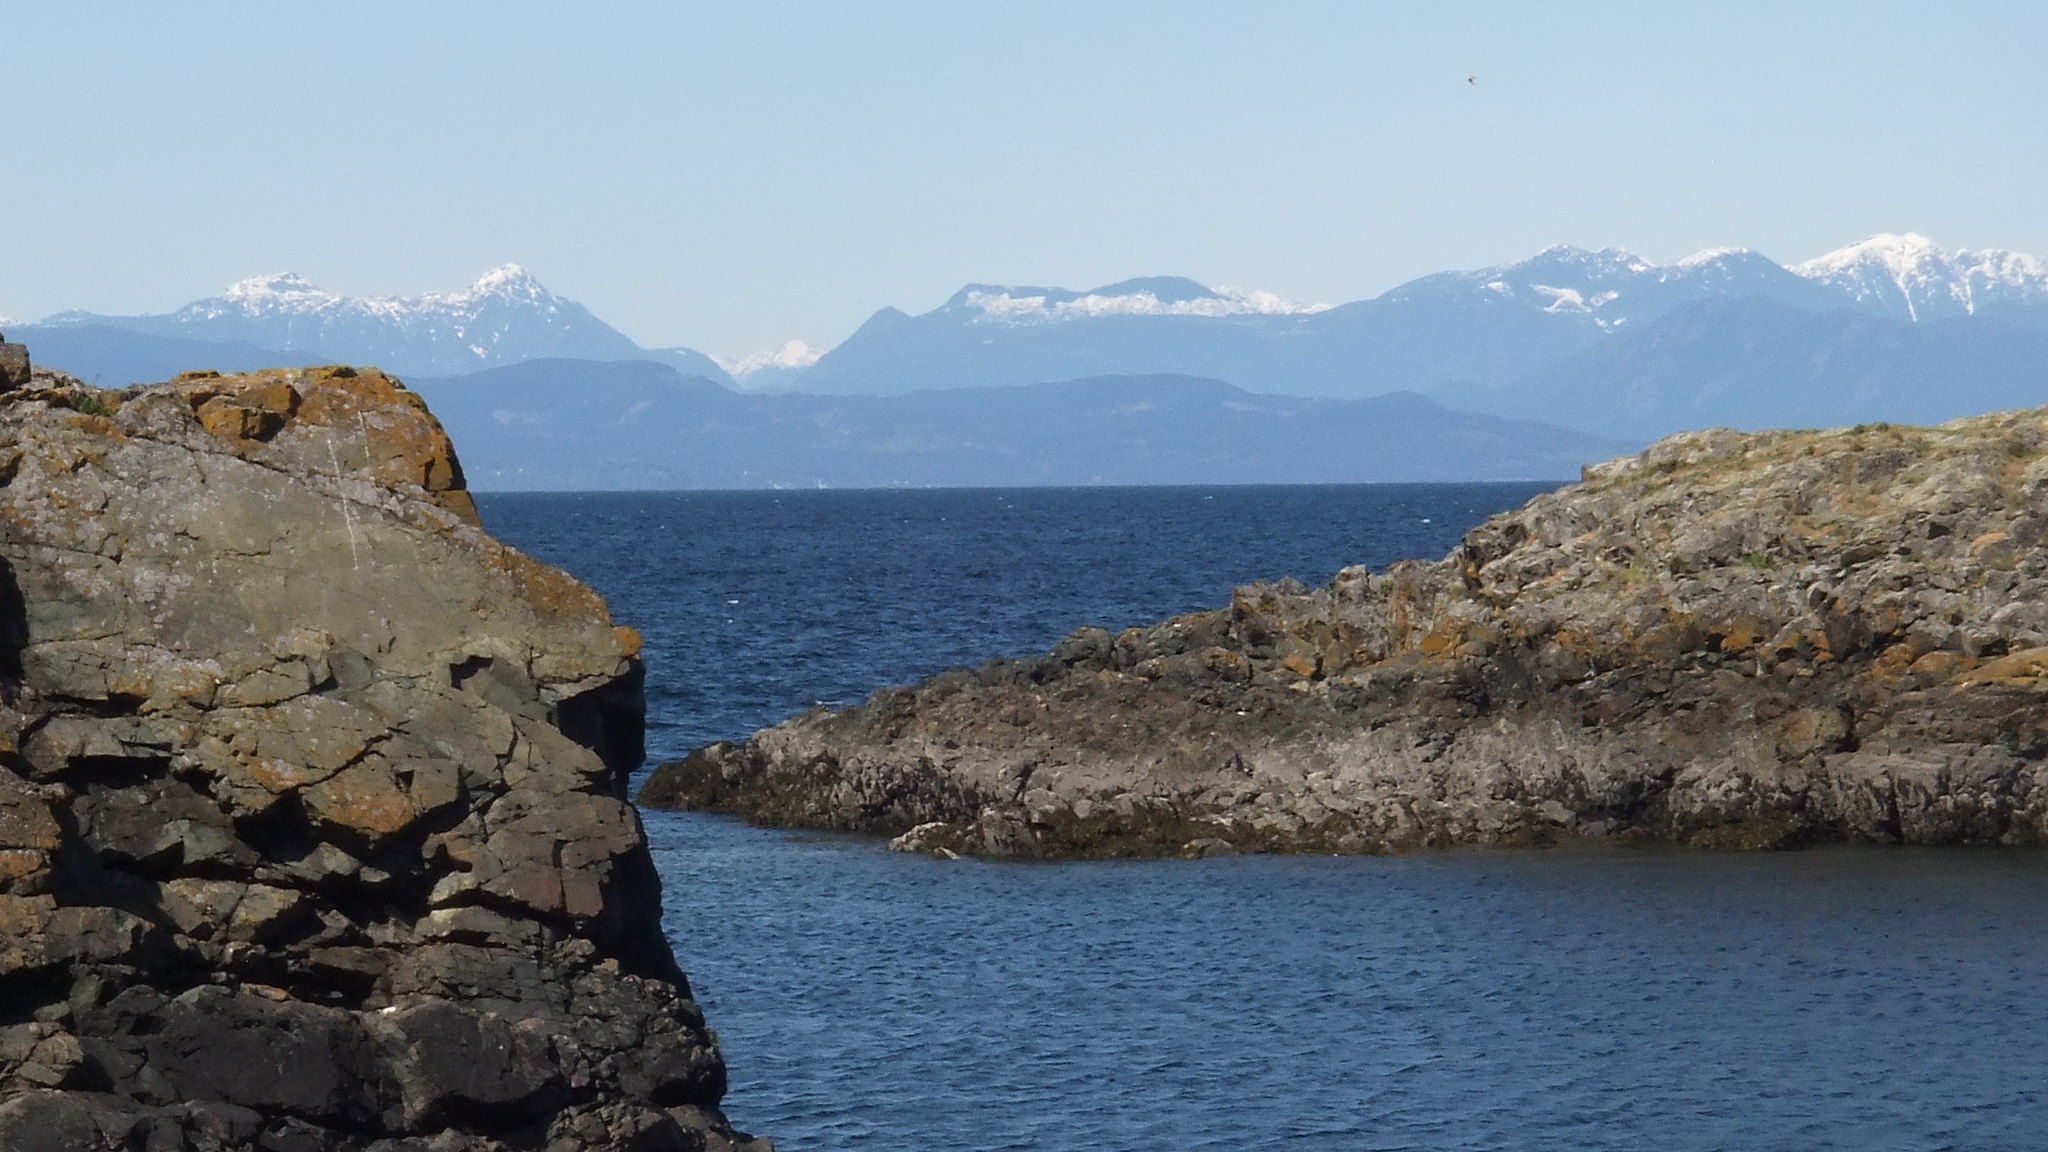 Snowy mountains can be seen across the ocean from a rocky shore.